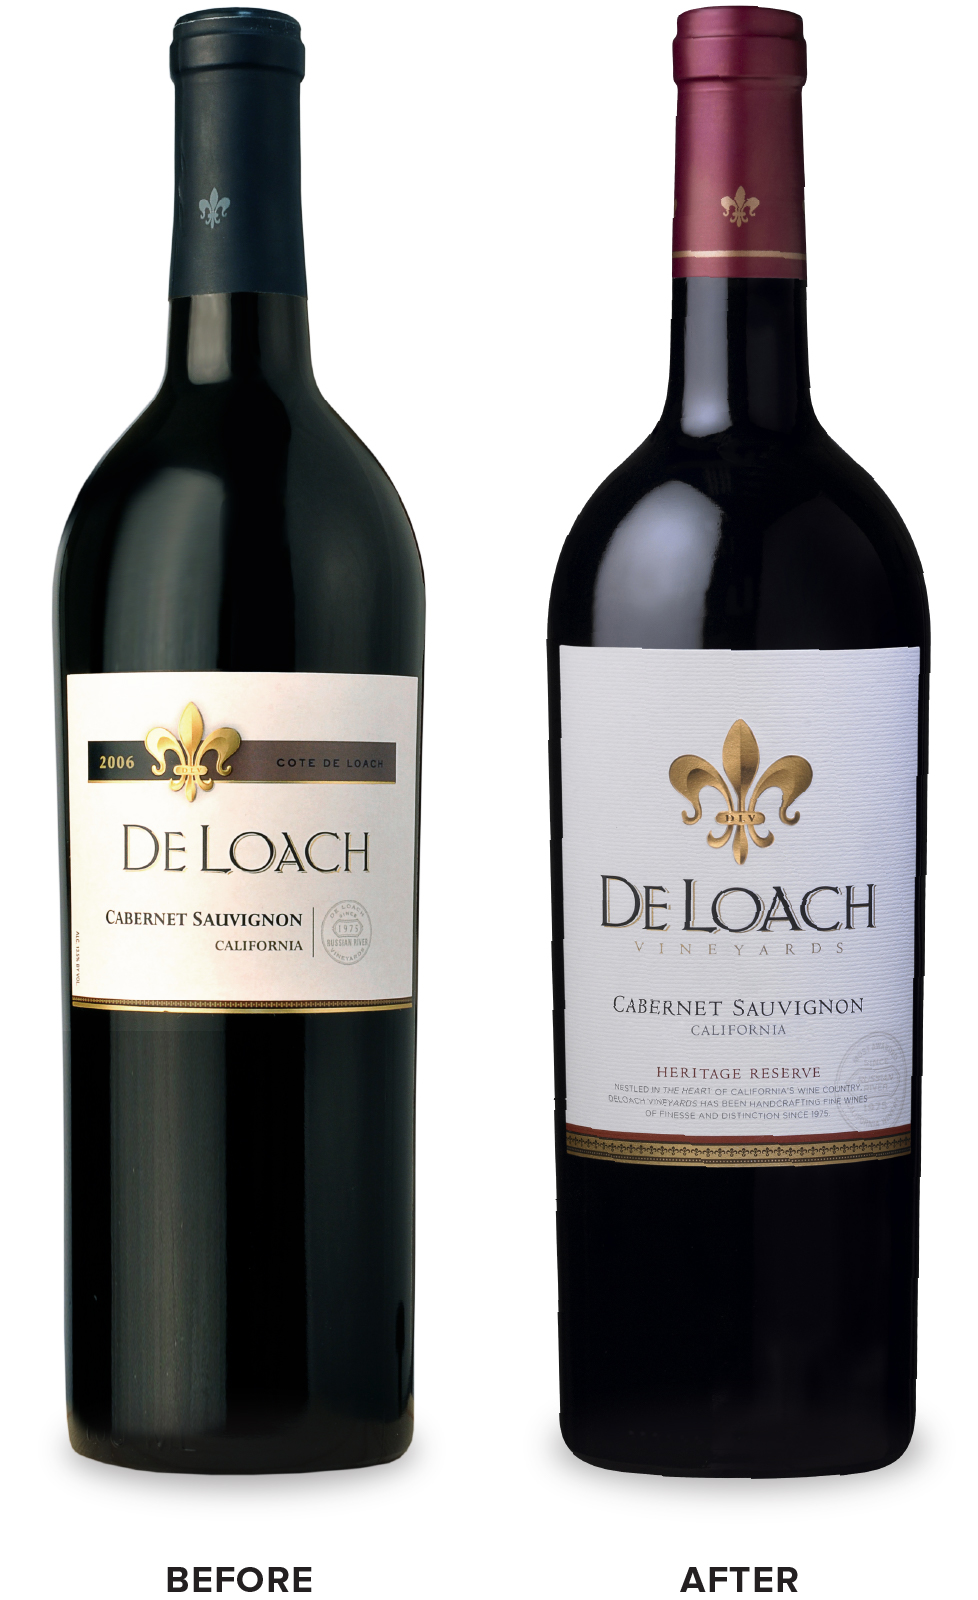 DeLoach Vineyards Heritage Reserve Wine Packaging Before Redesign on Left & After on Right